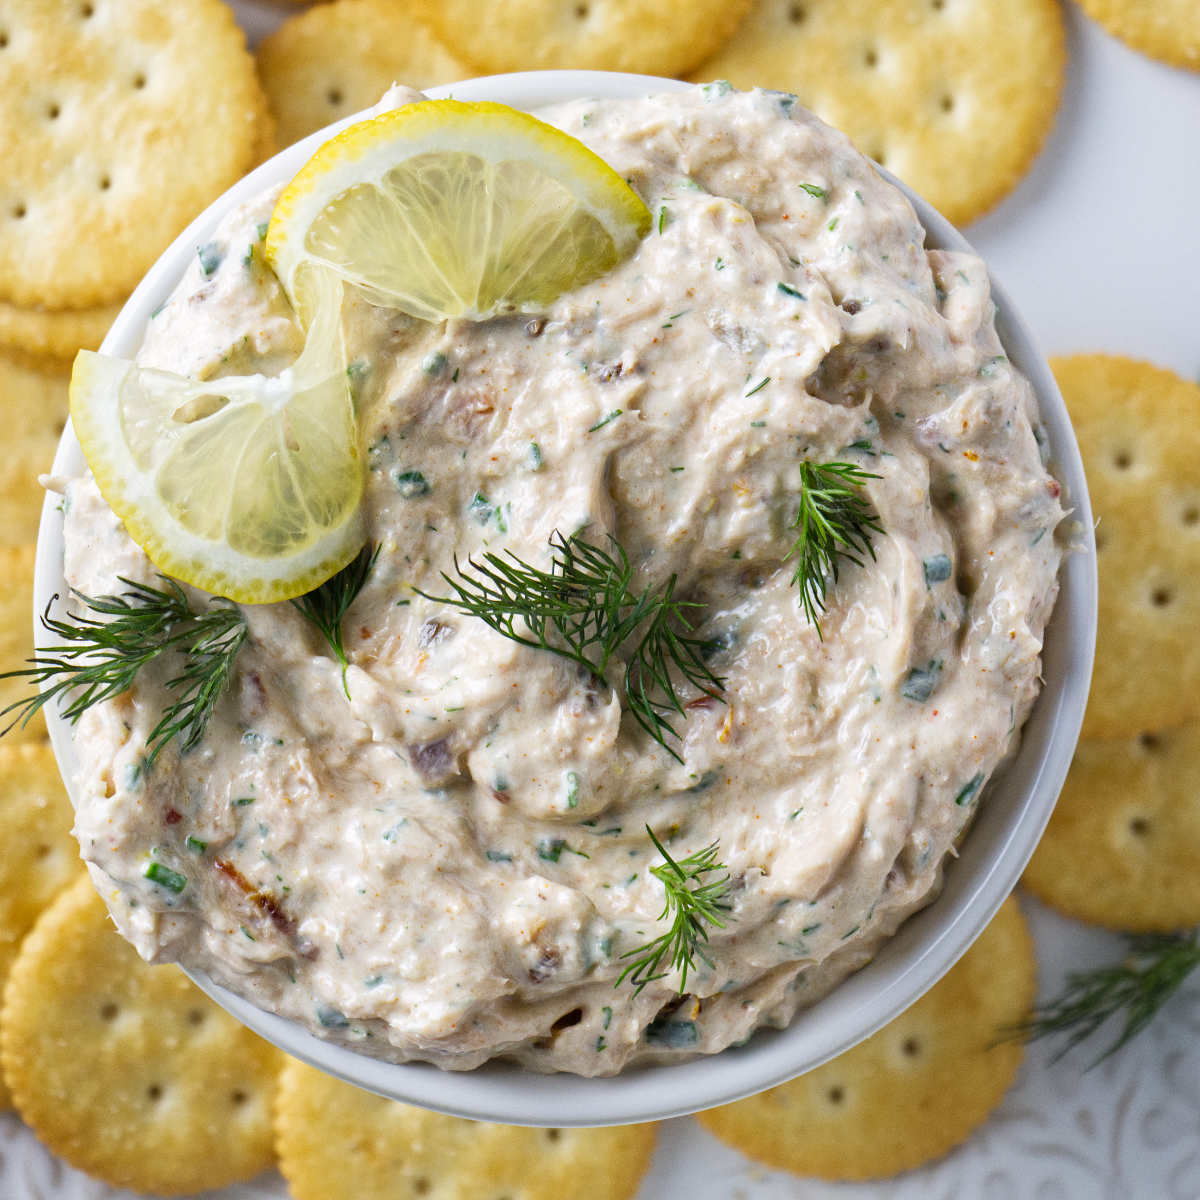 A dish filled with smoked trout dip.